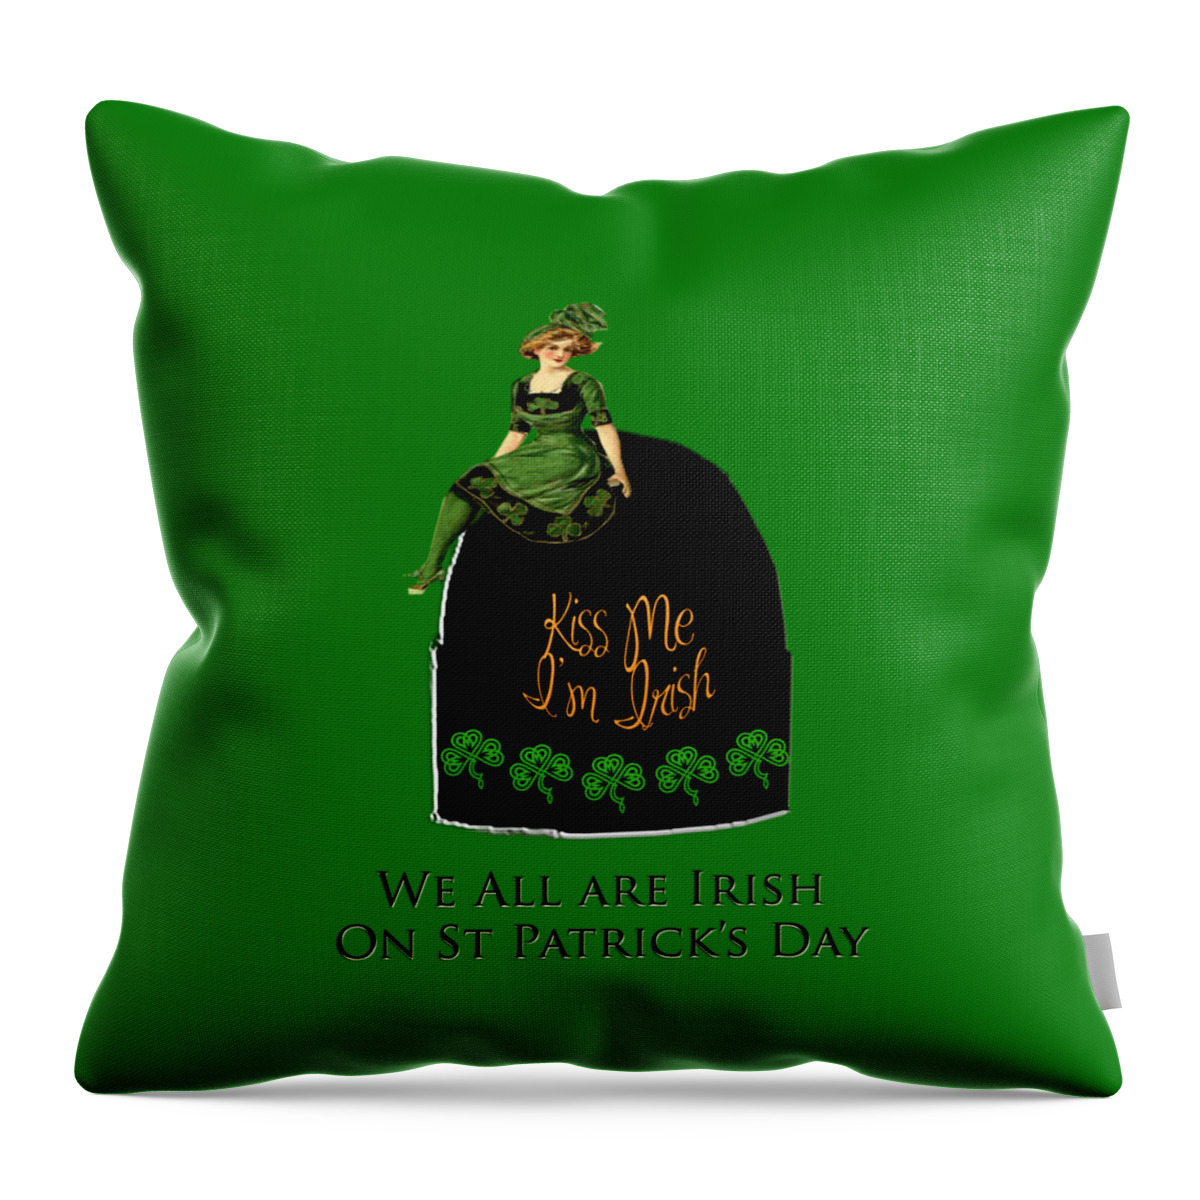 Saint Patrick�s Day Throw Pillow featuring the digital art We All Irish This Beautiful Day by Asok Mukhopadhyay